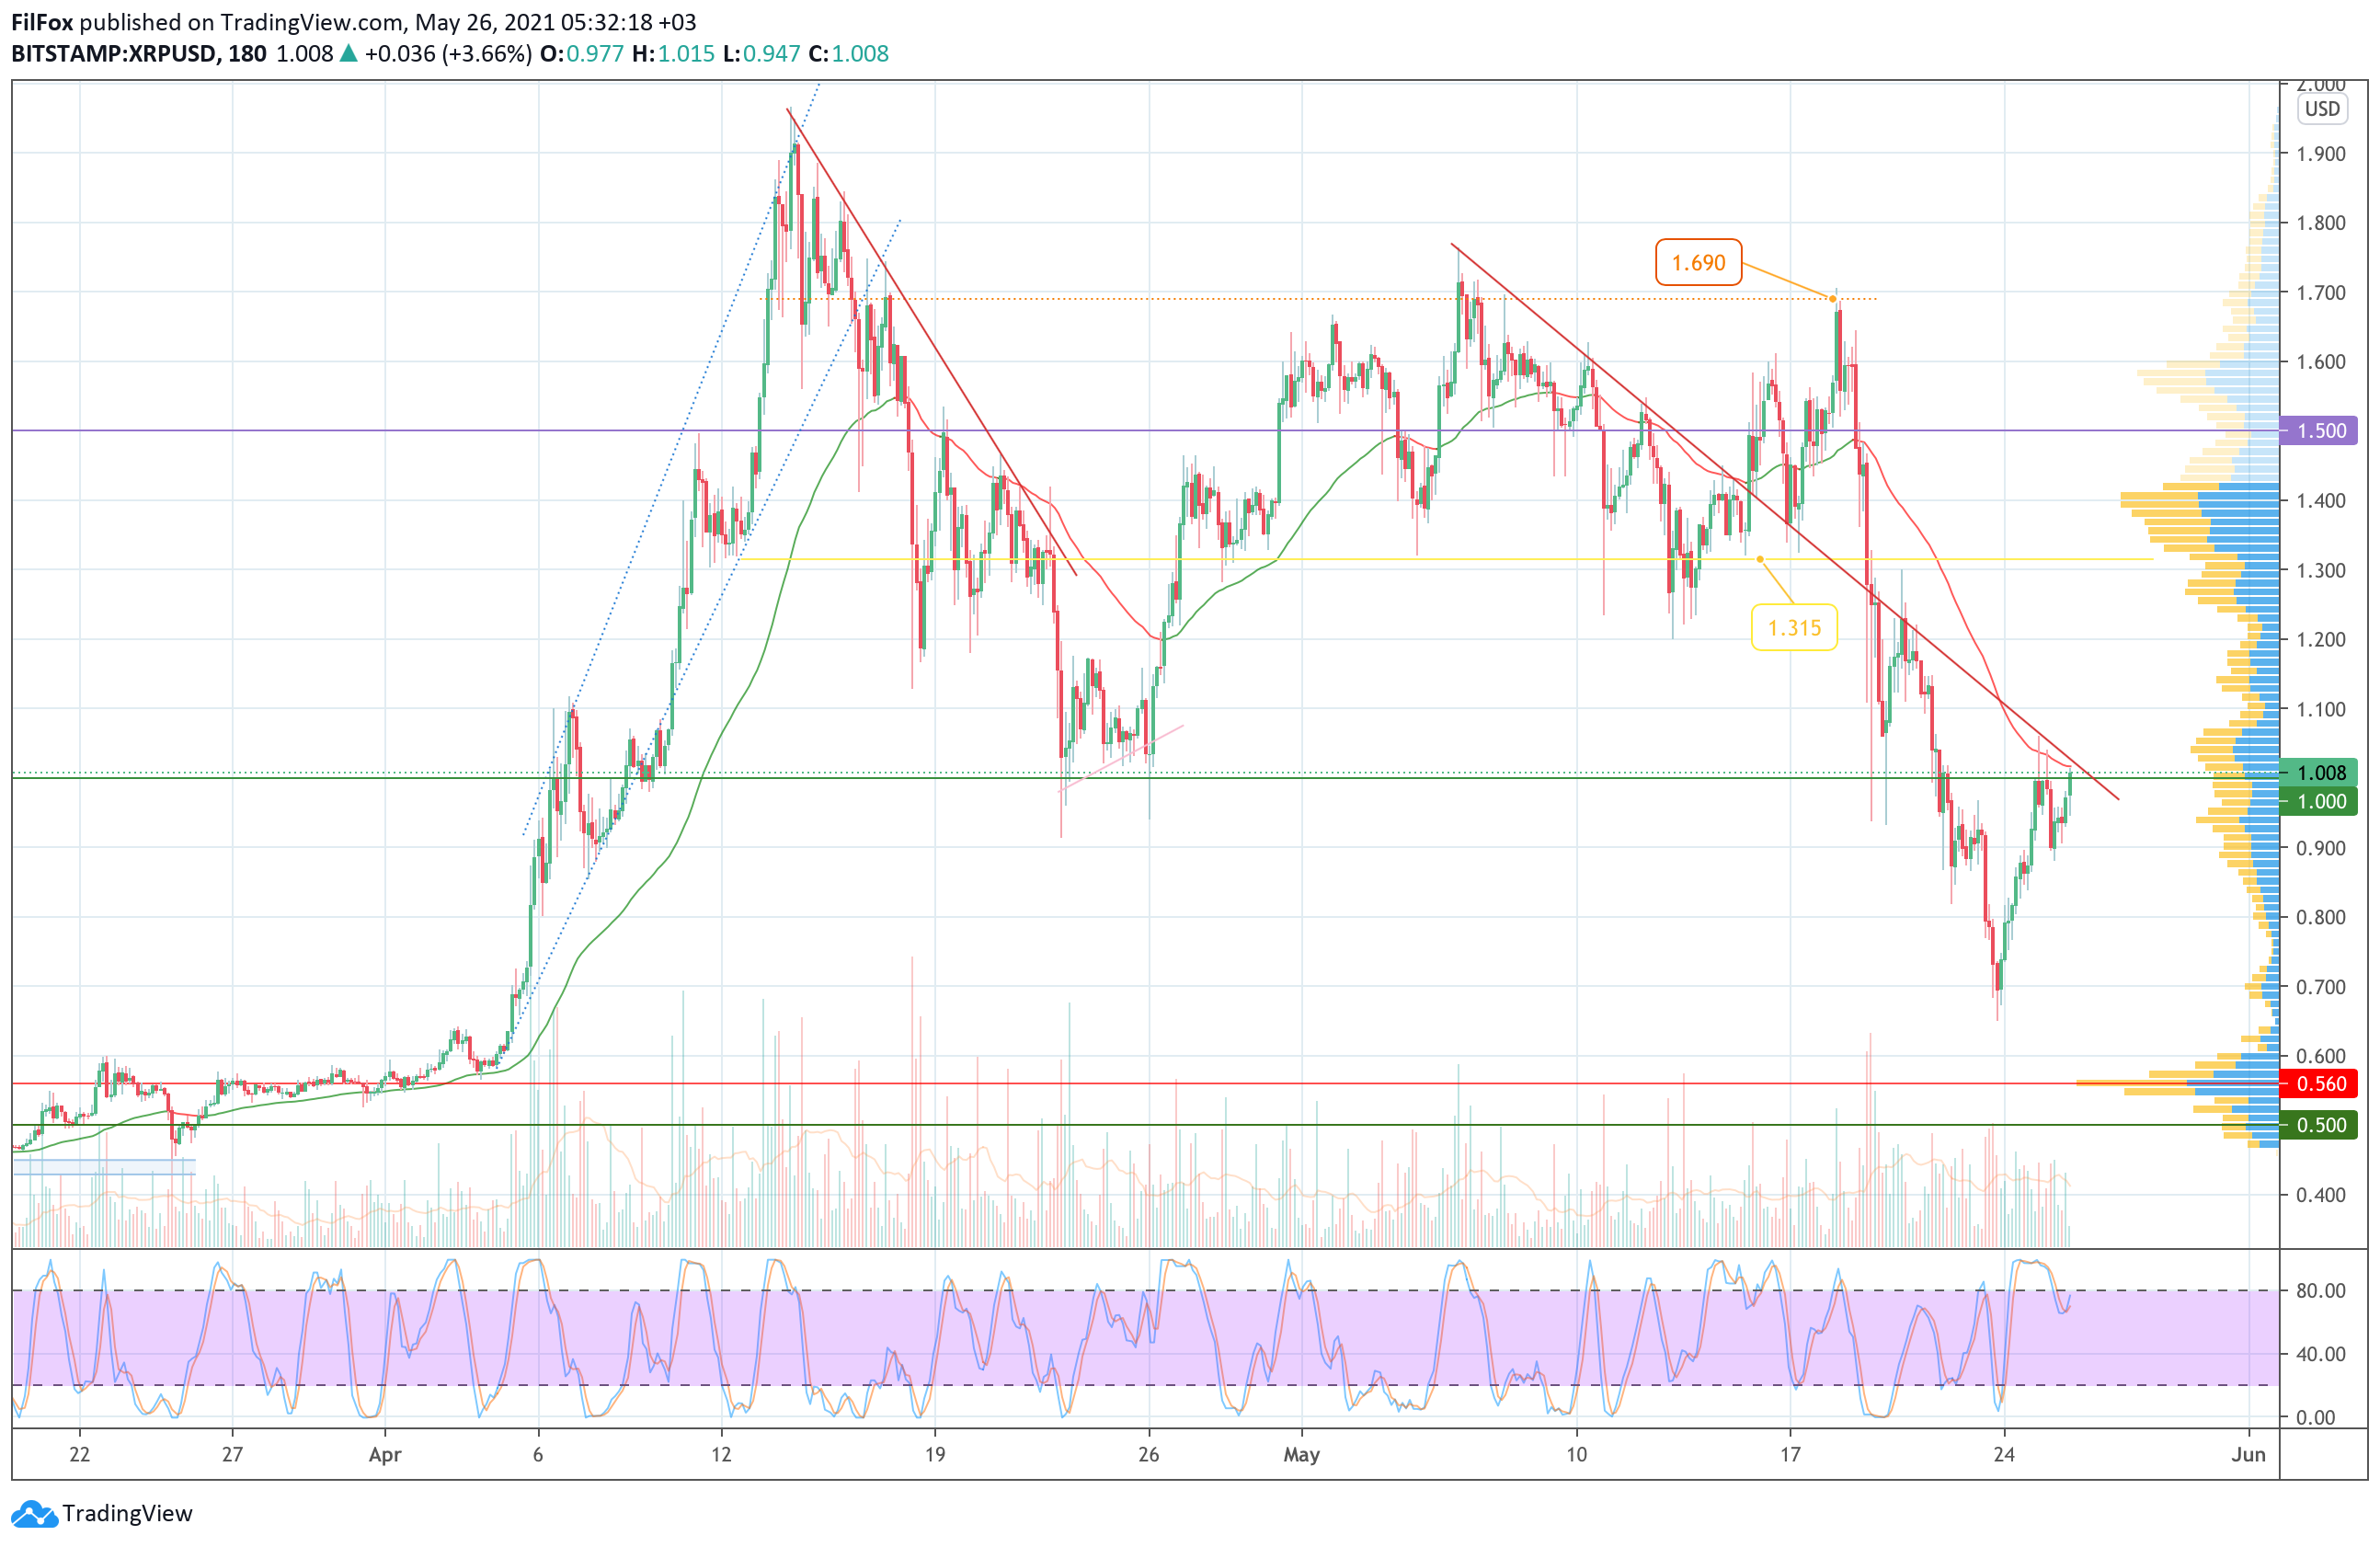 Analysis of the prices of Bitcoin, Ethereum, XRP for 05/26/2021